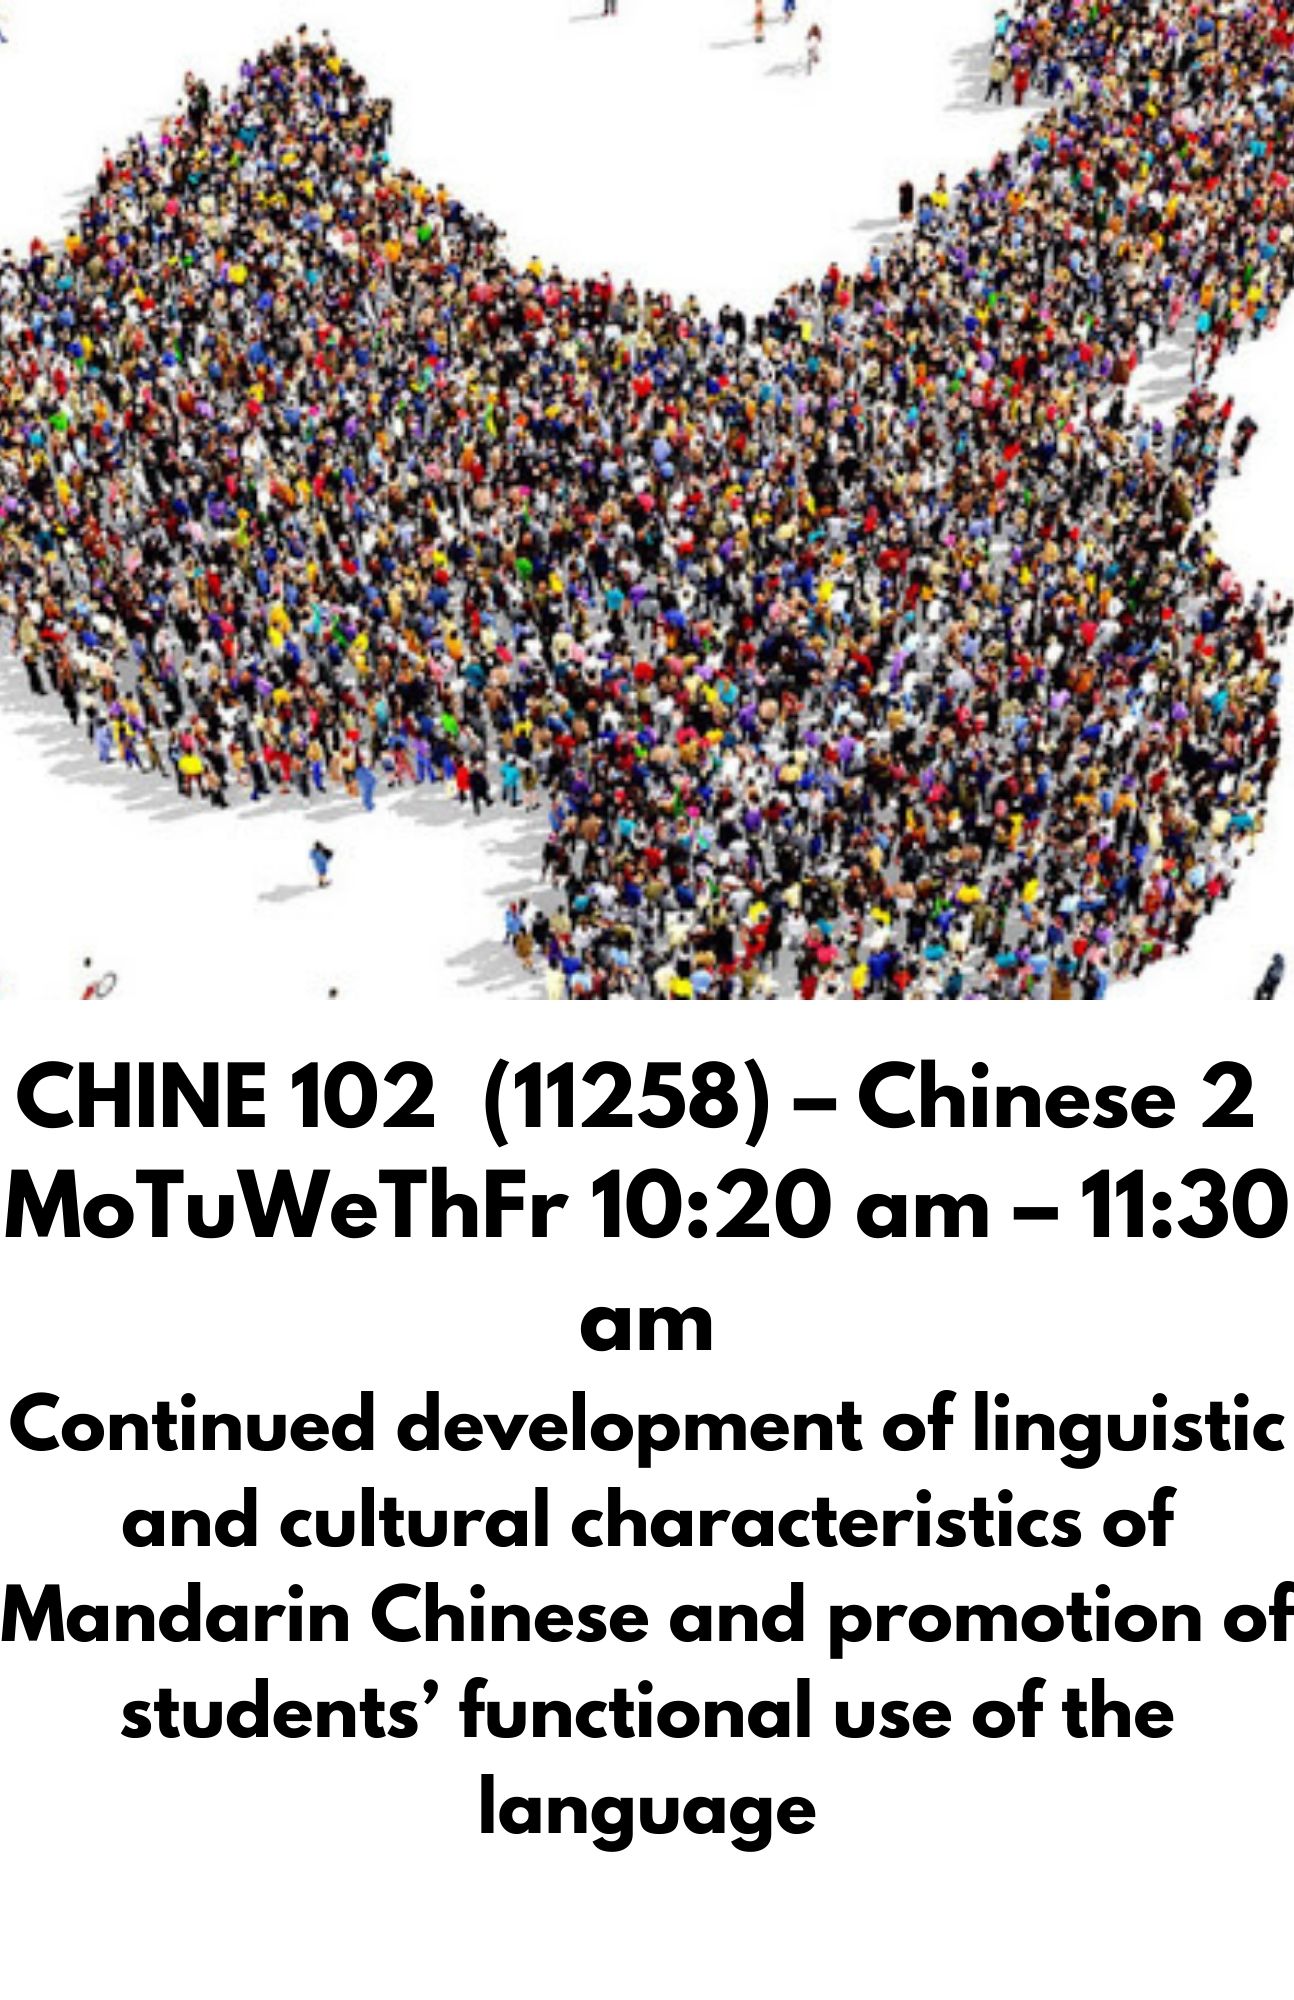 CHINE 102  (11258) – Chinese 2  MoTuWeThFr 10:20 am – 11:30 am Continued development of linguistic and cultural characteristics of Mandarin Chinese and promotion of students’ functional use of the language